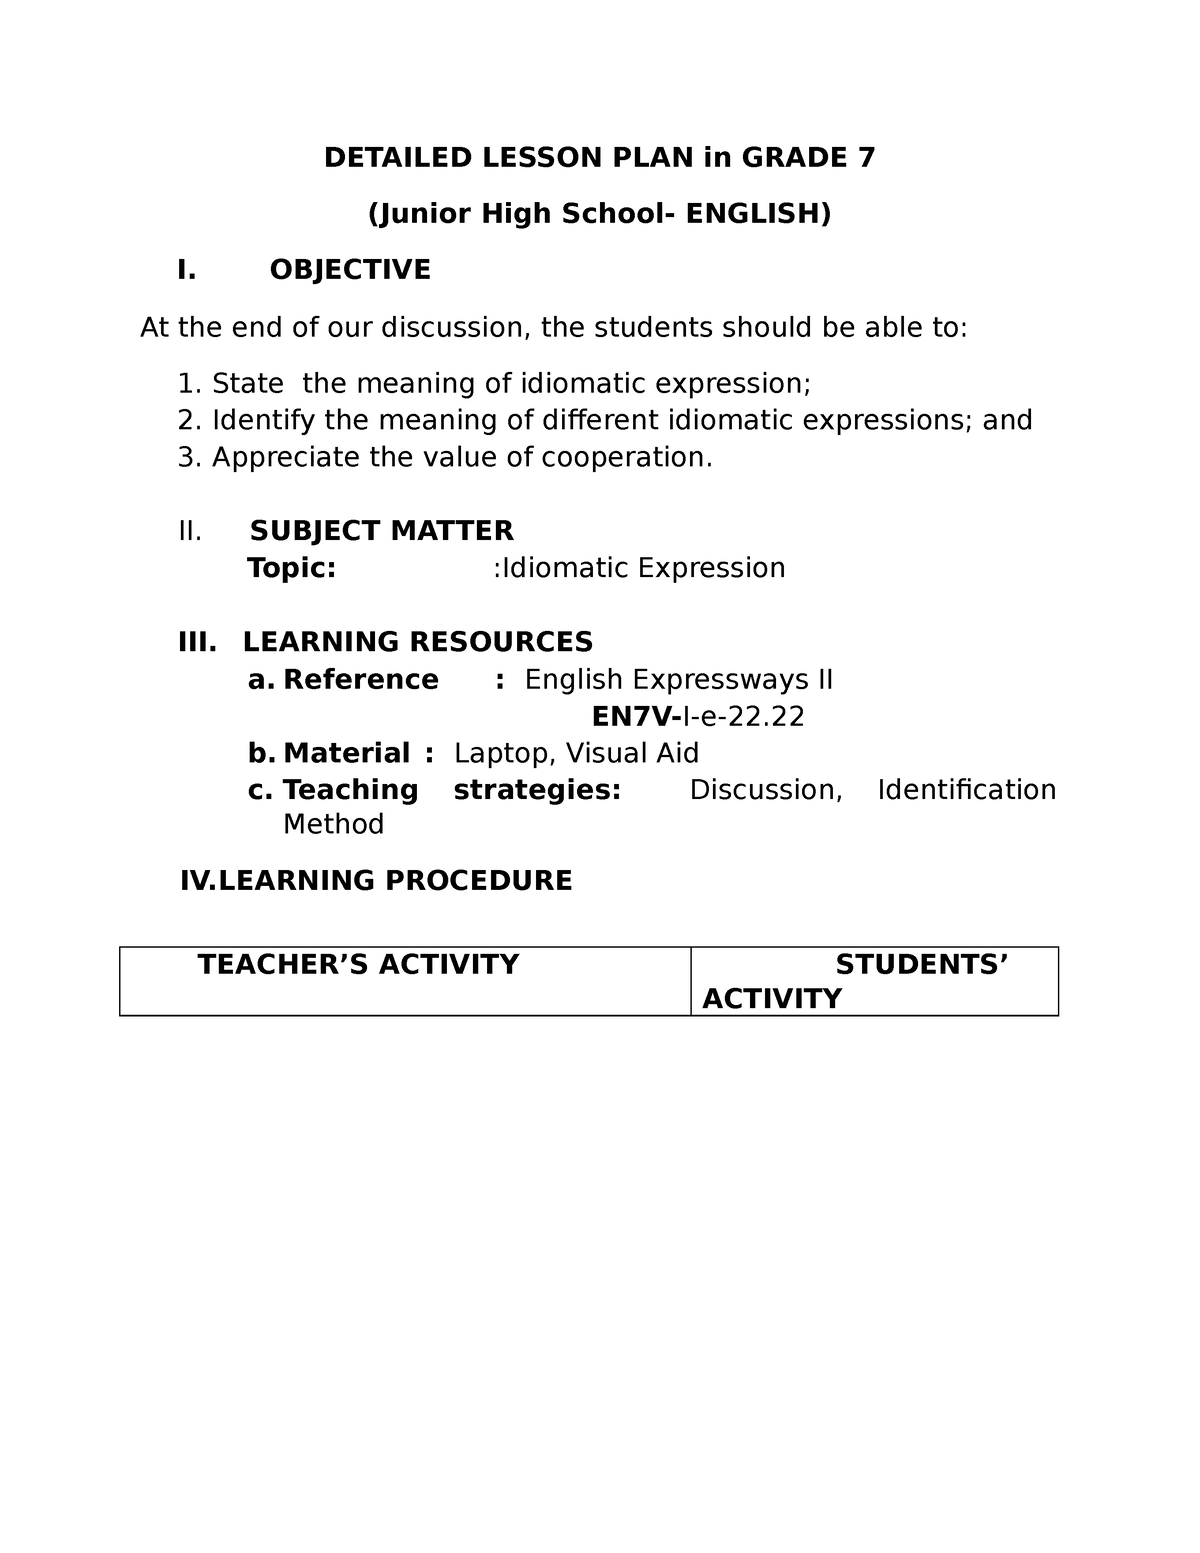 DLP IT IS HELPFUL TO US DETAILED LESSON PLAN In GRADE 7 Junior 